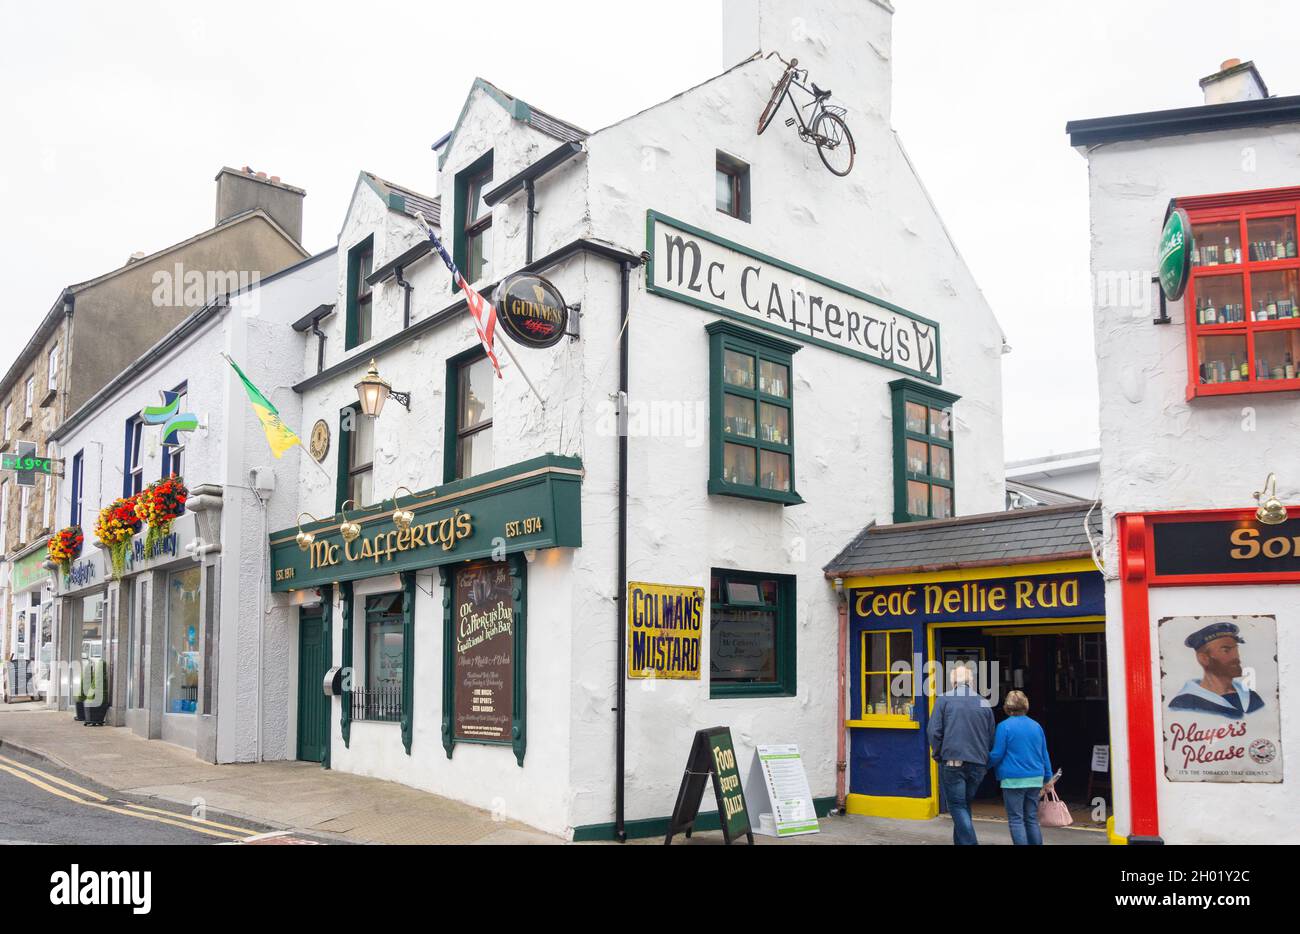 McCafferty's Pub, Quay Street, Donegal (Dun na nGall), County Donegal, Republic of Ireland Stock Photo